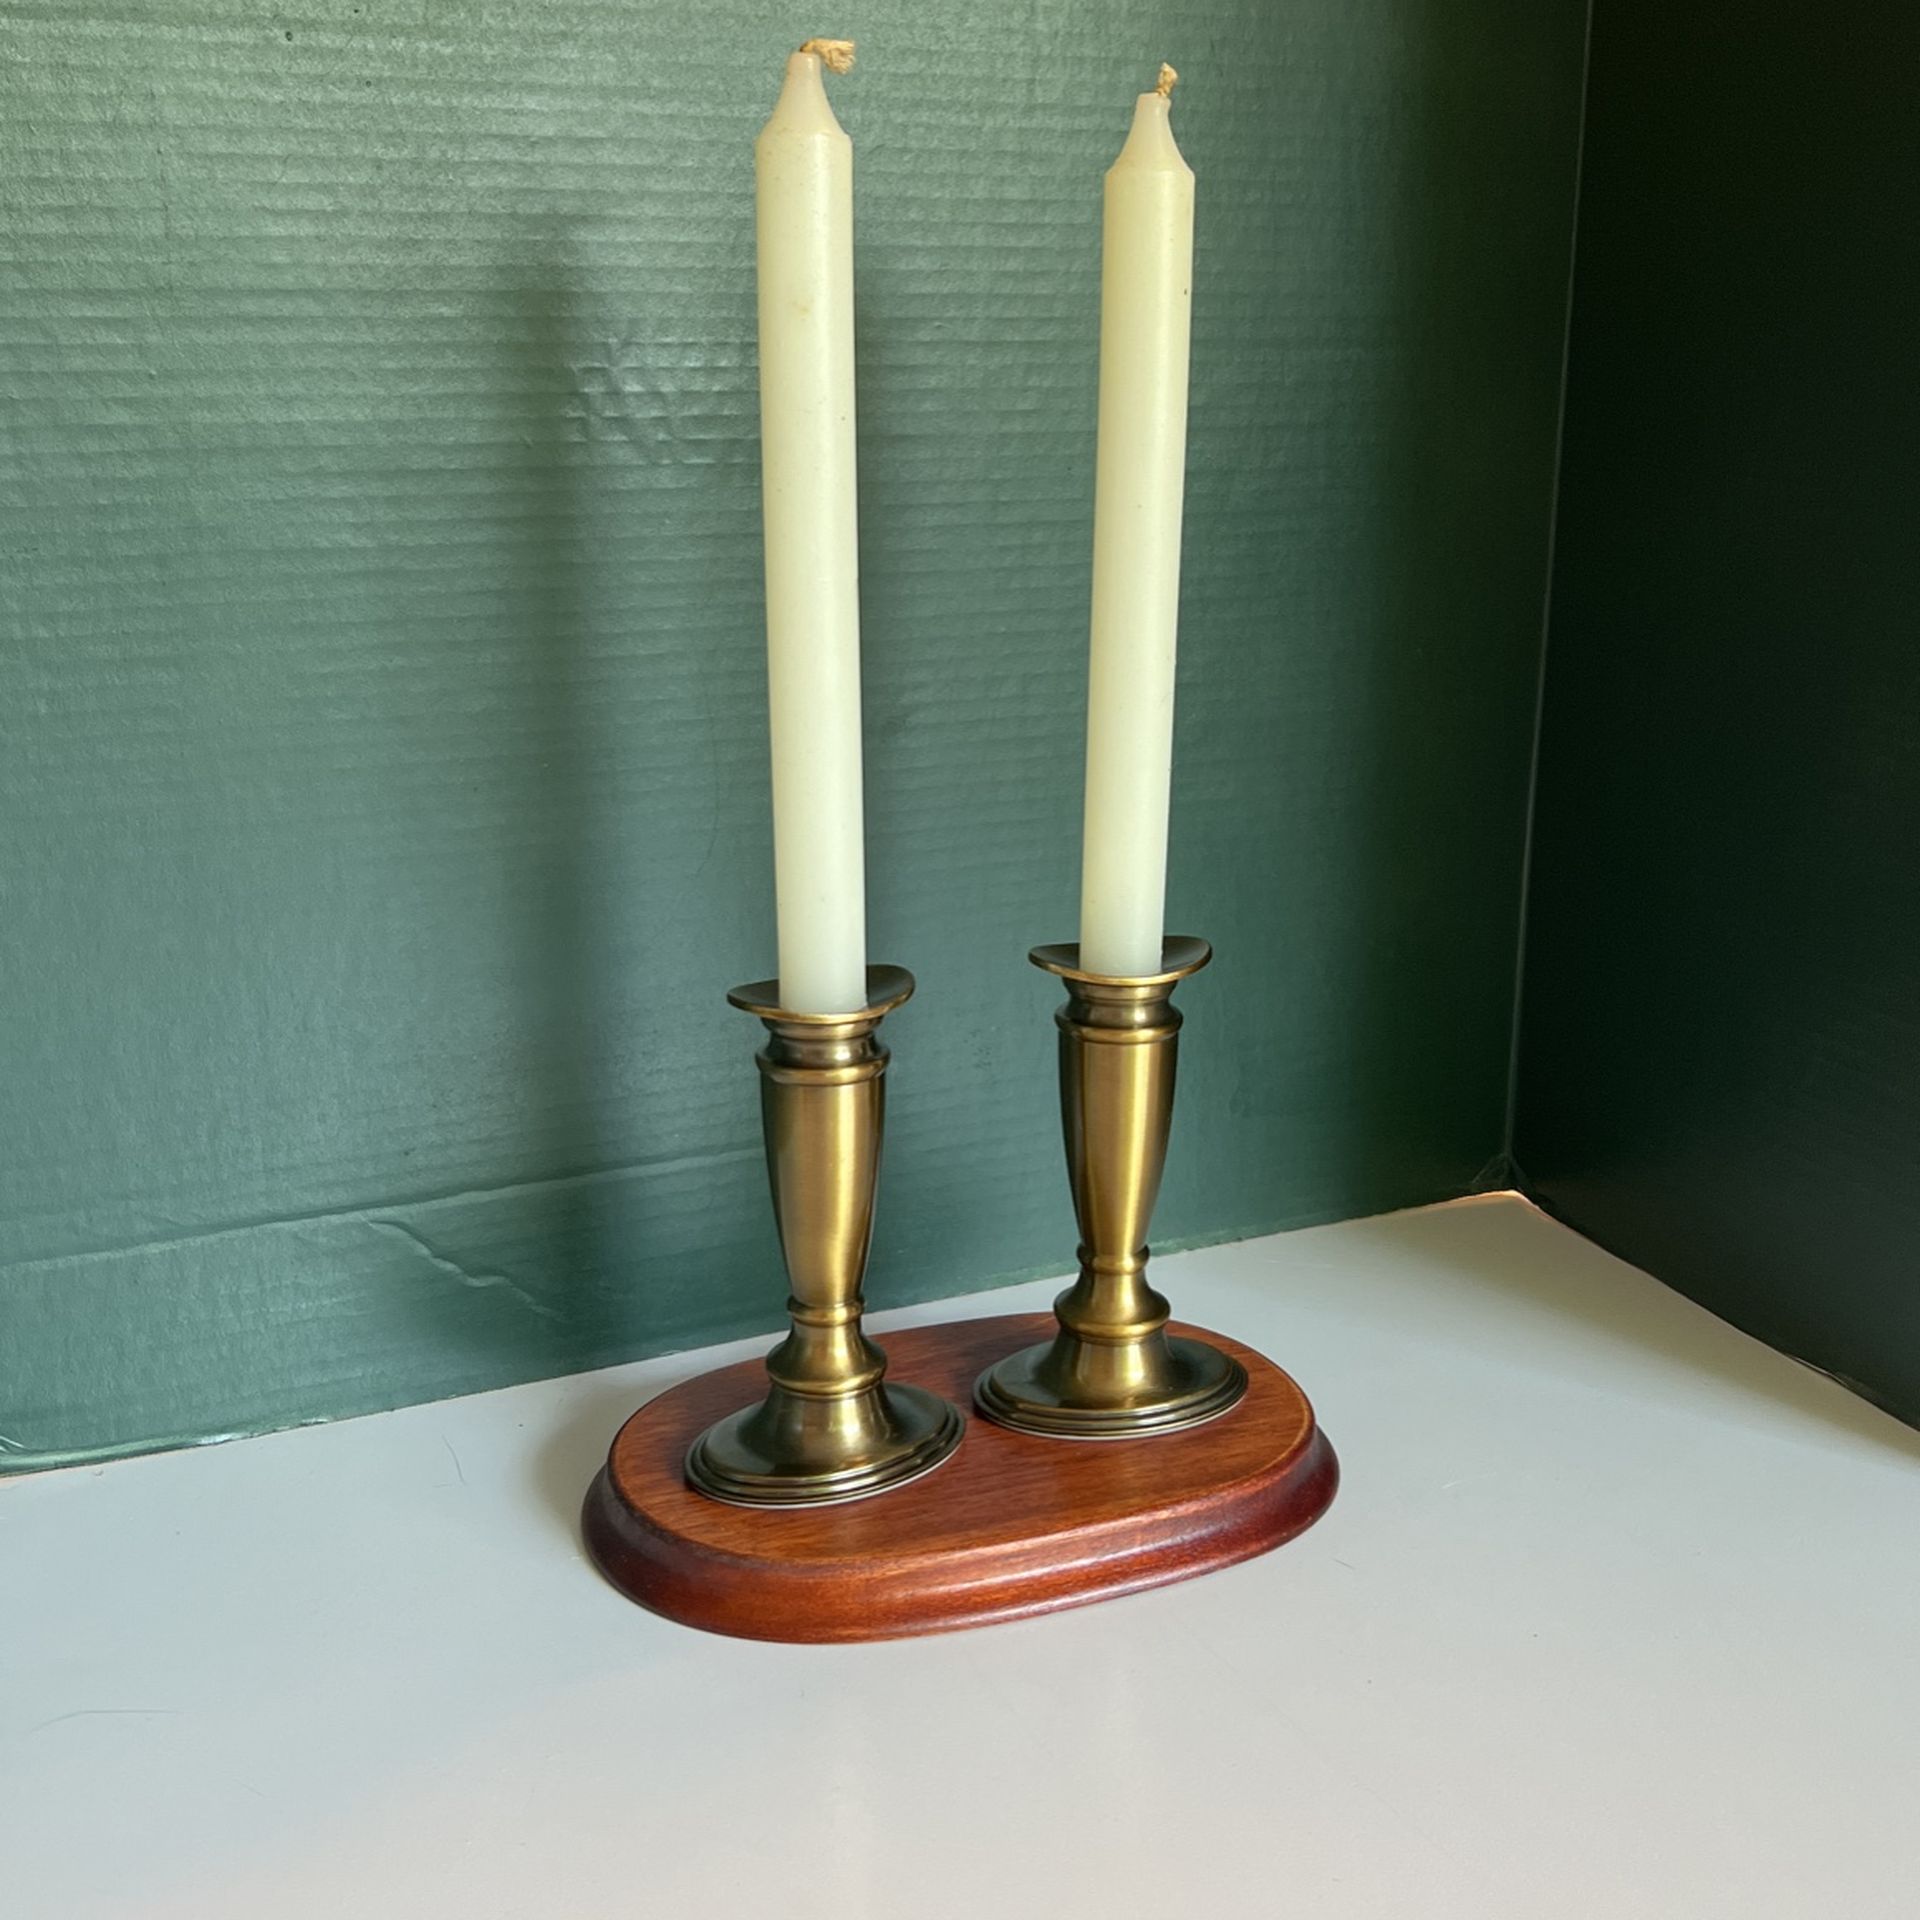 Brushed Brass Candle Holders